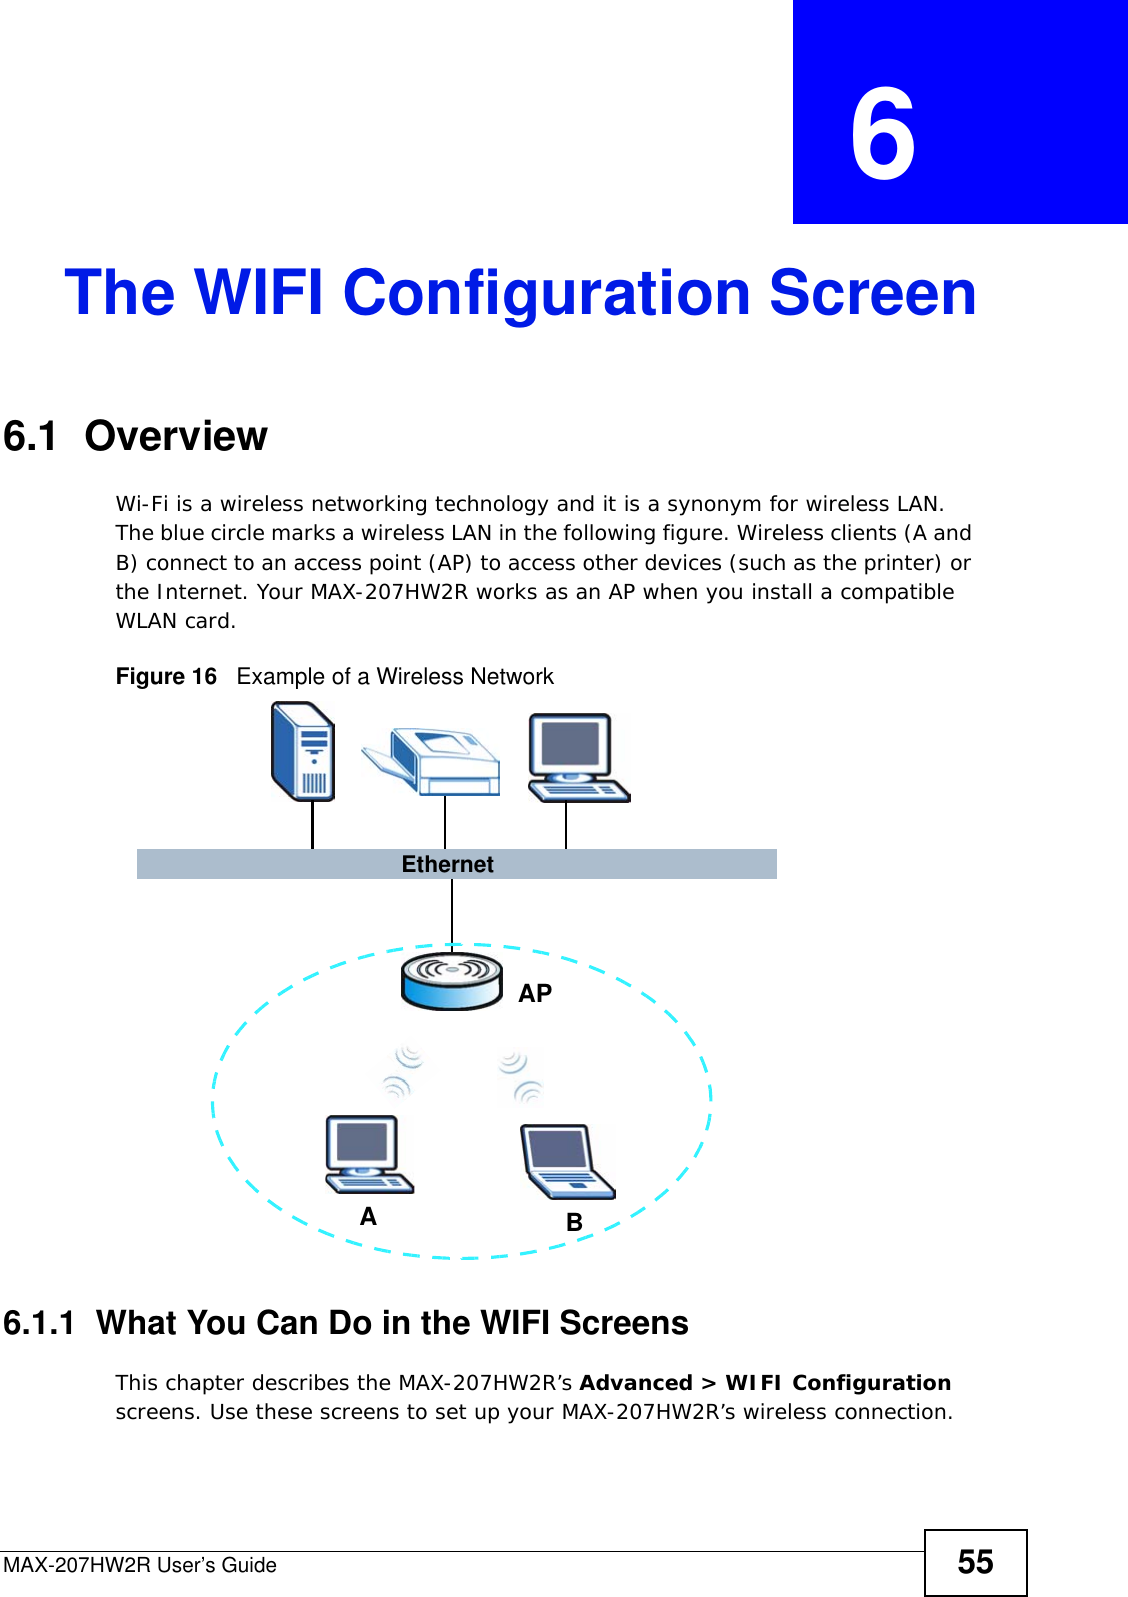 MAX-207HW2R User’s Guide 55CHAPTER  6 The WIFI Configuration Screen6.1  Overview Wi-Fi is a wireless networking technology and it is a synonym for wireless LAN. The blue circle marks a wireless LAN in the following figure. Wireless clients (A and B) connect to an access point (AP) to access other devices (such as the printer) or the Internet. Your MAX-207HW2R works as an AP when you install a compatible WLAN card.Figure 16   Example of a Wireless Network6.1.1  What You Can Do in the WIFI ScreensThis chapter describes the MAX-207HW2R’s Advanced &gt; WIFI Configuration screens. Use these screens to set up your MAX-207HW2R’s wireless connection.ABAPEthernet